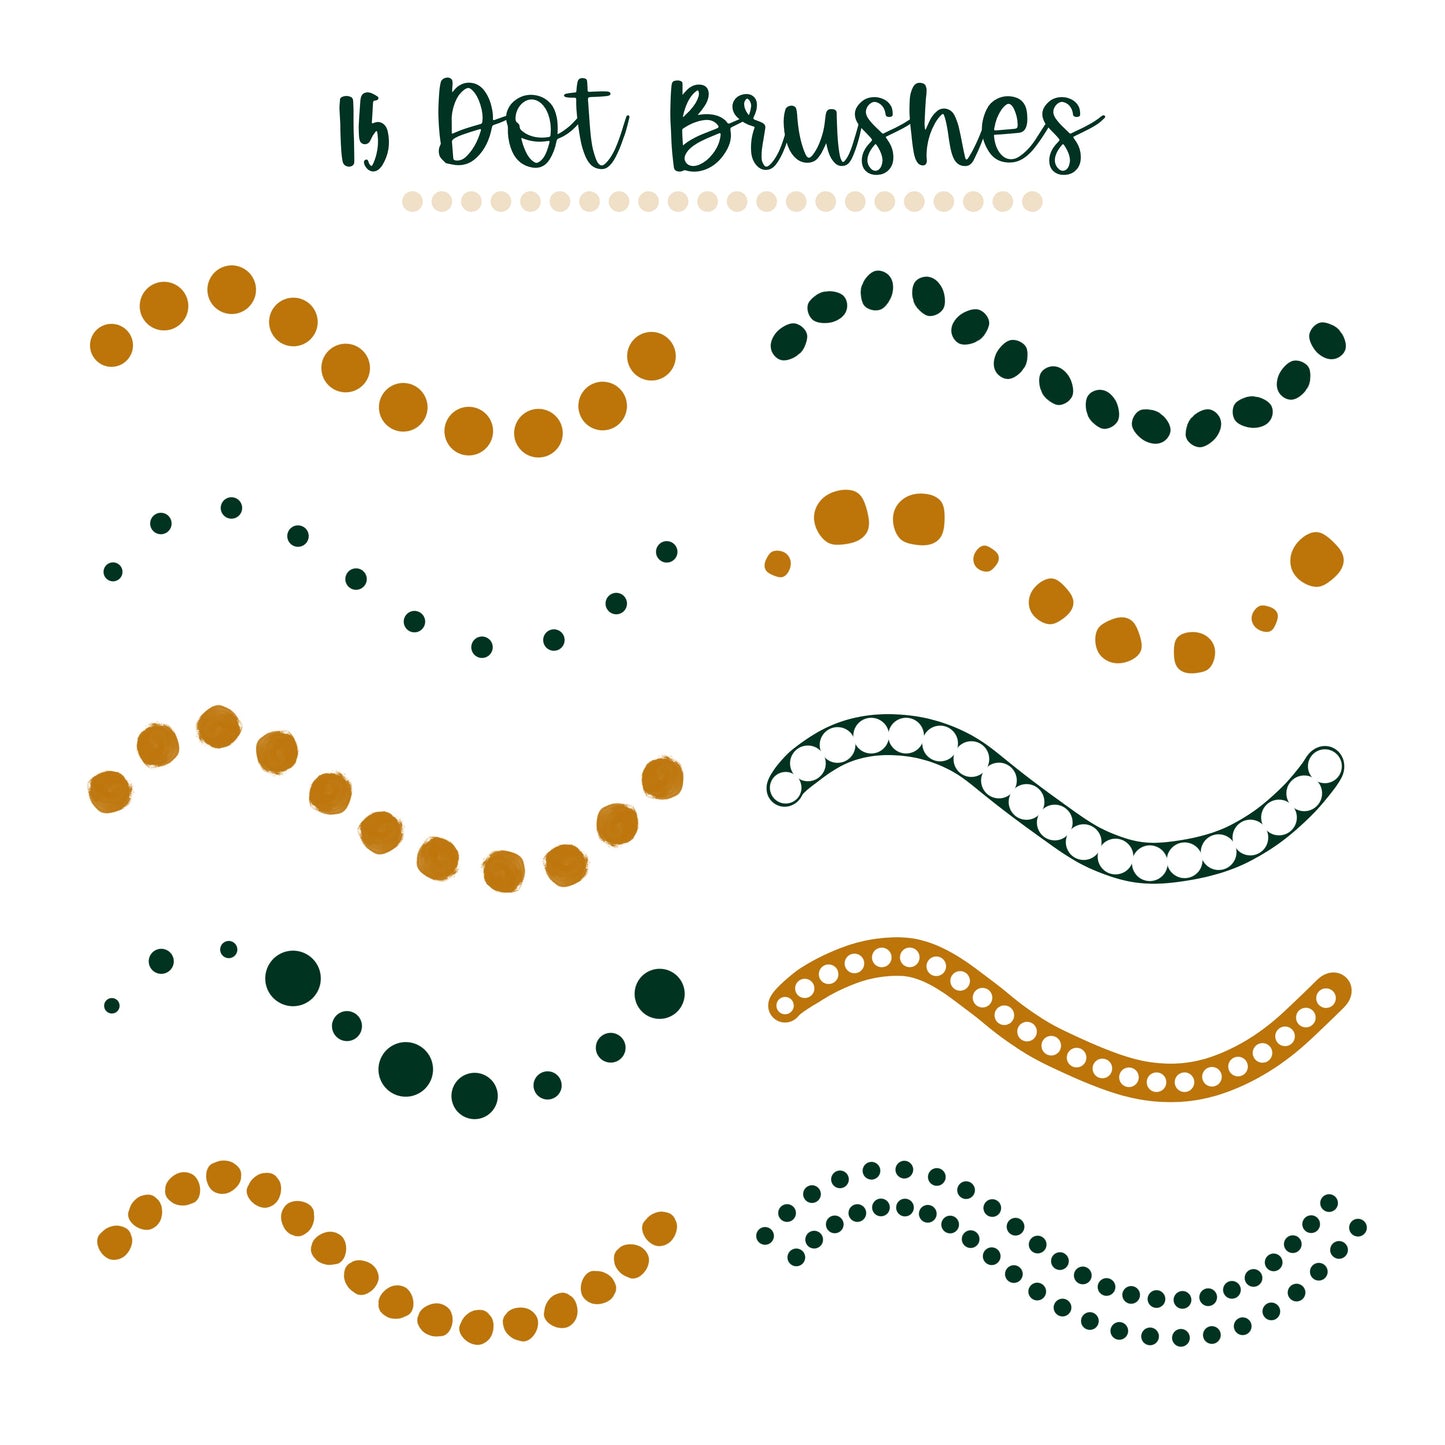 Dotted Border Brushes